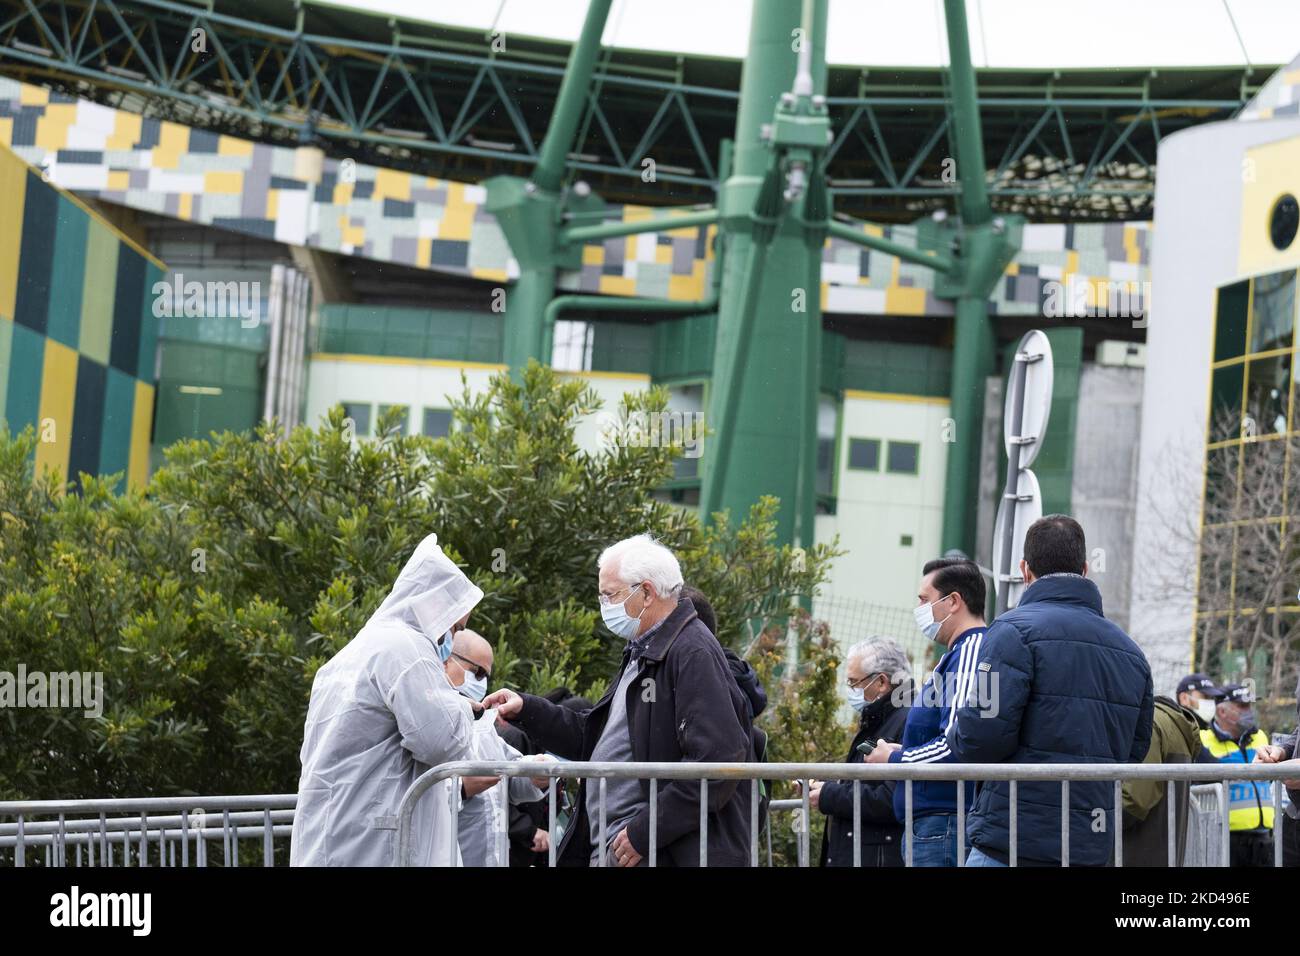 Many members of the club head to the facilities of João Rocha Pavilion, near the Alvalade stadium to vote for the new president of Sporting Clube de Portugal, on March 5, 2022, at the João Rocha Pavilion, in Lisbon, Portugal. The Elections for the New President of Sporting Clube de Portugal are held today. Frederico Varandas is the main candidate and the actual President and competes against Ricardo Oliveira and Nuno Sousa. (Photo by Nuno Cruz/NurPhoto) Stock Photo